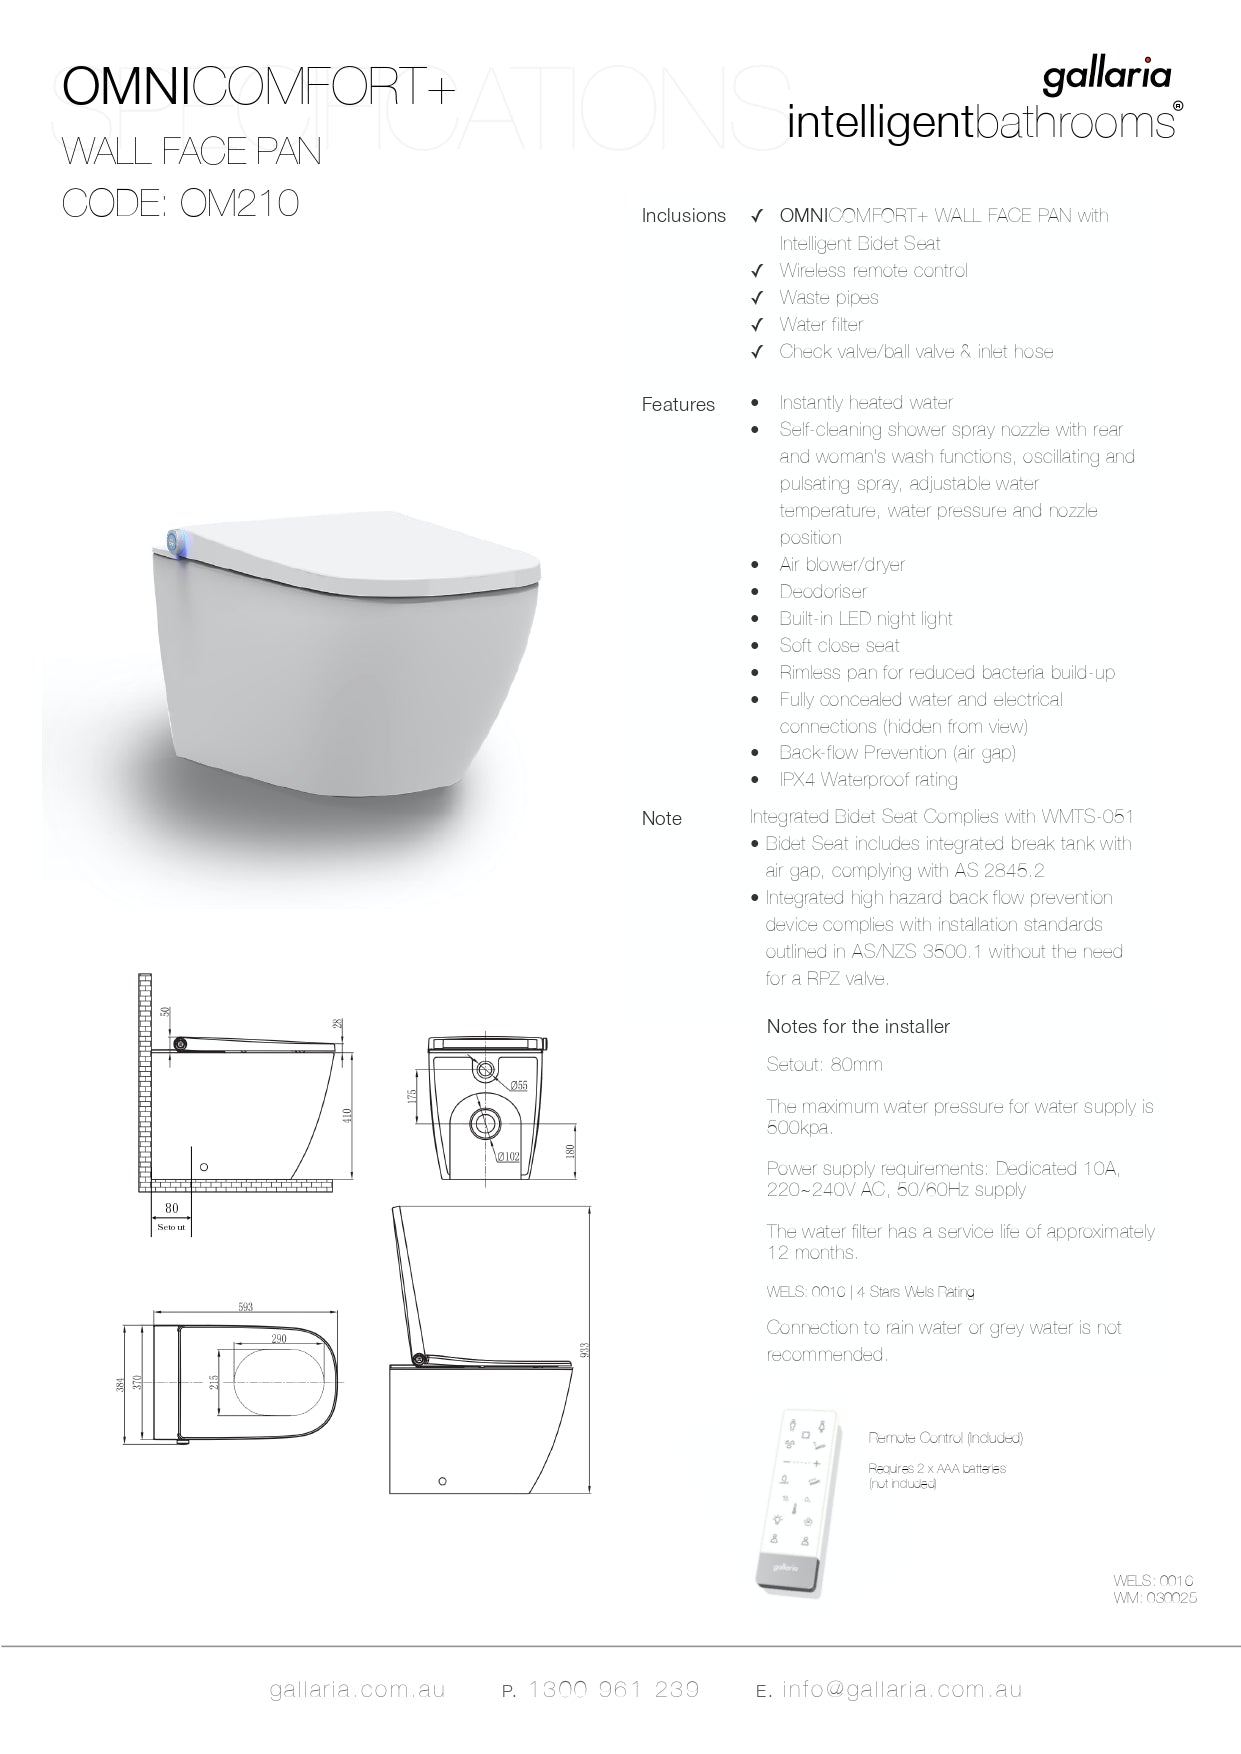 GALLARIA OMNI COMFORT RIMLESS WALL FACE PAN AND REMOTE WASHLET PACKAGE GLOSS WHITE